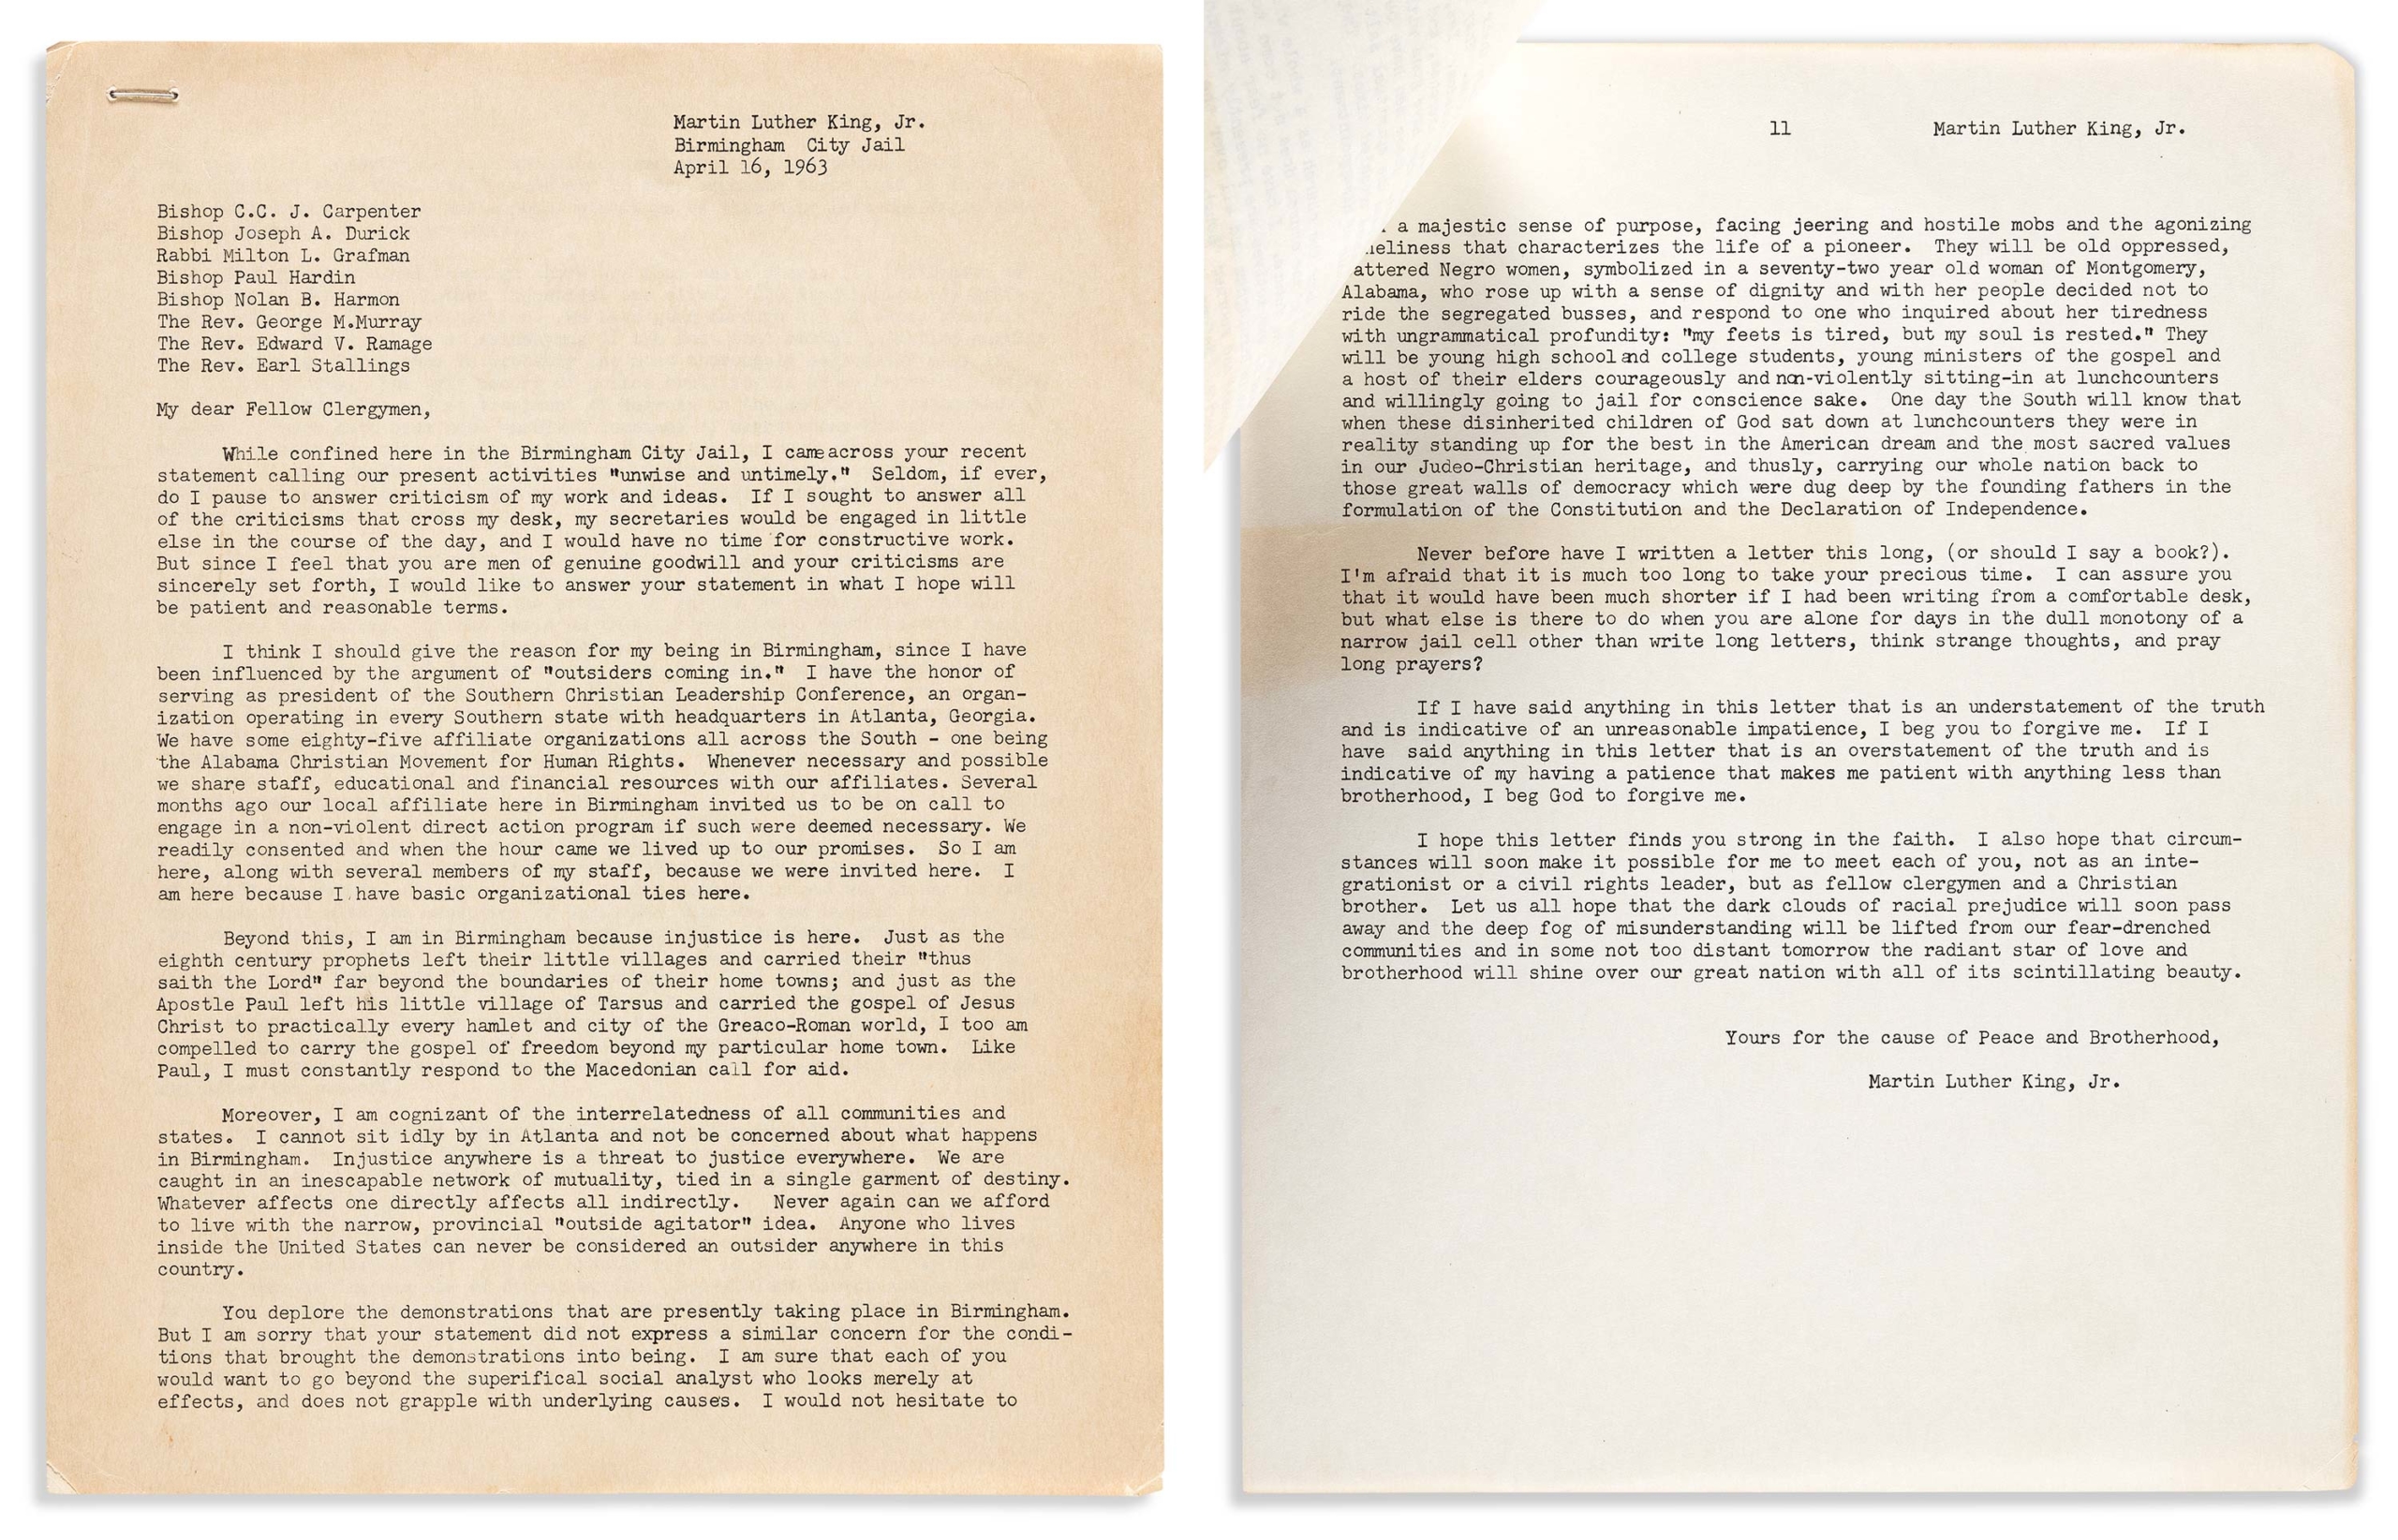 Dr. Martin Luther King, Jr., early draft, 'Letter from Birmingham Jail,' 1963, $15,000-25,000. Image courtesy Swann's Auction Galleries